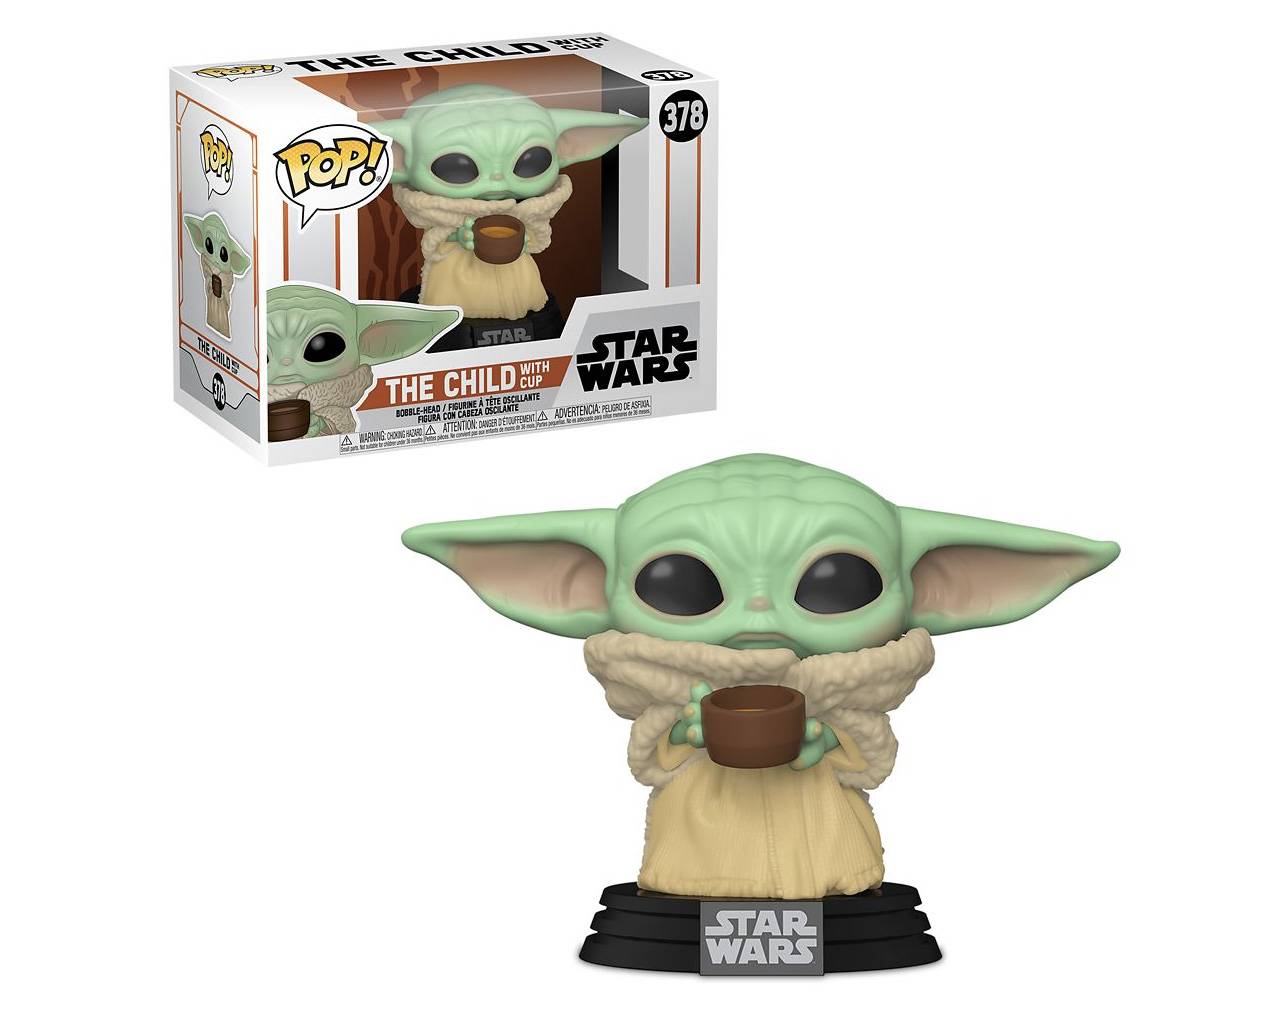 The Child with Cup - The Mandalorian Pop! Vinyl